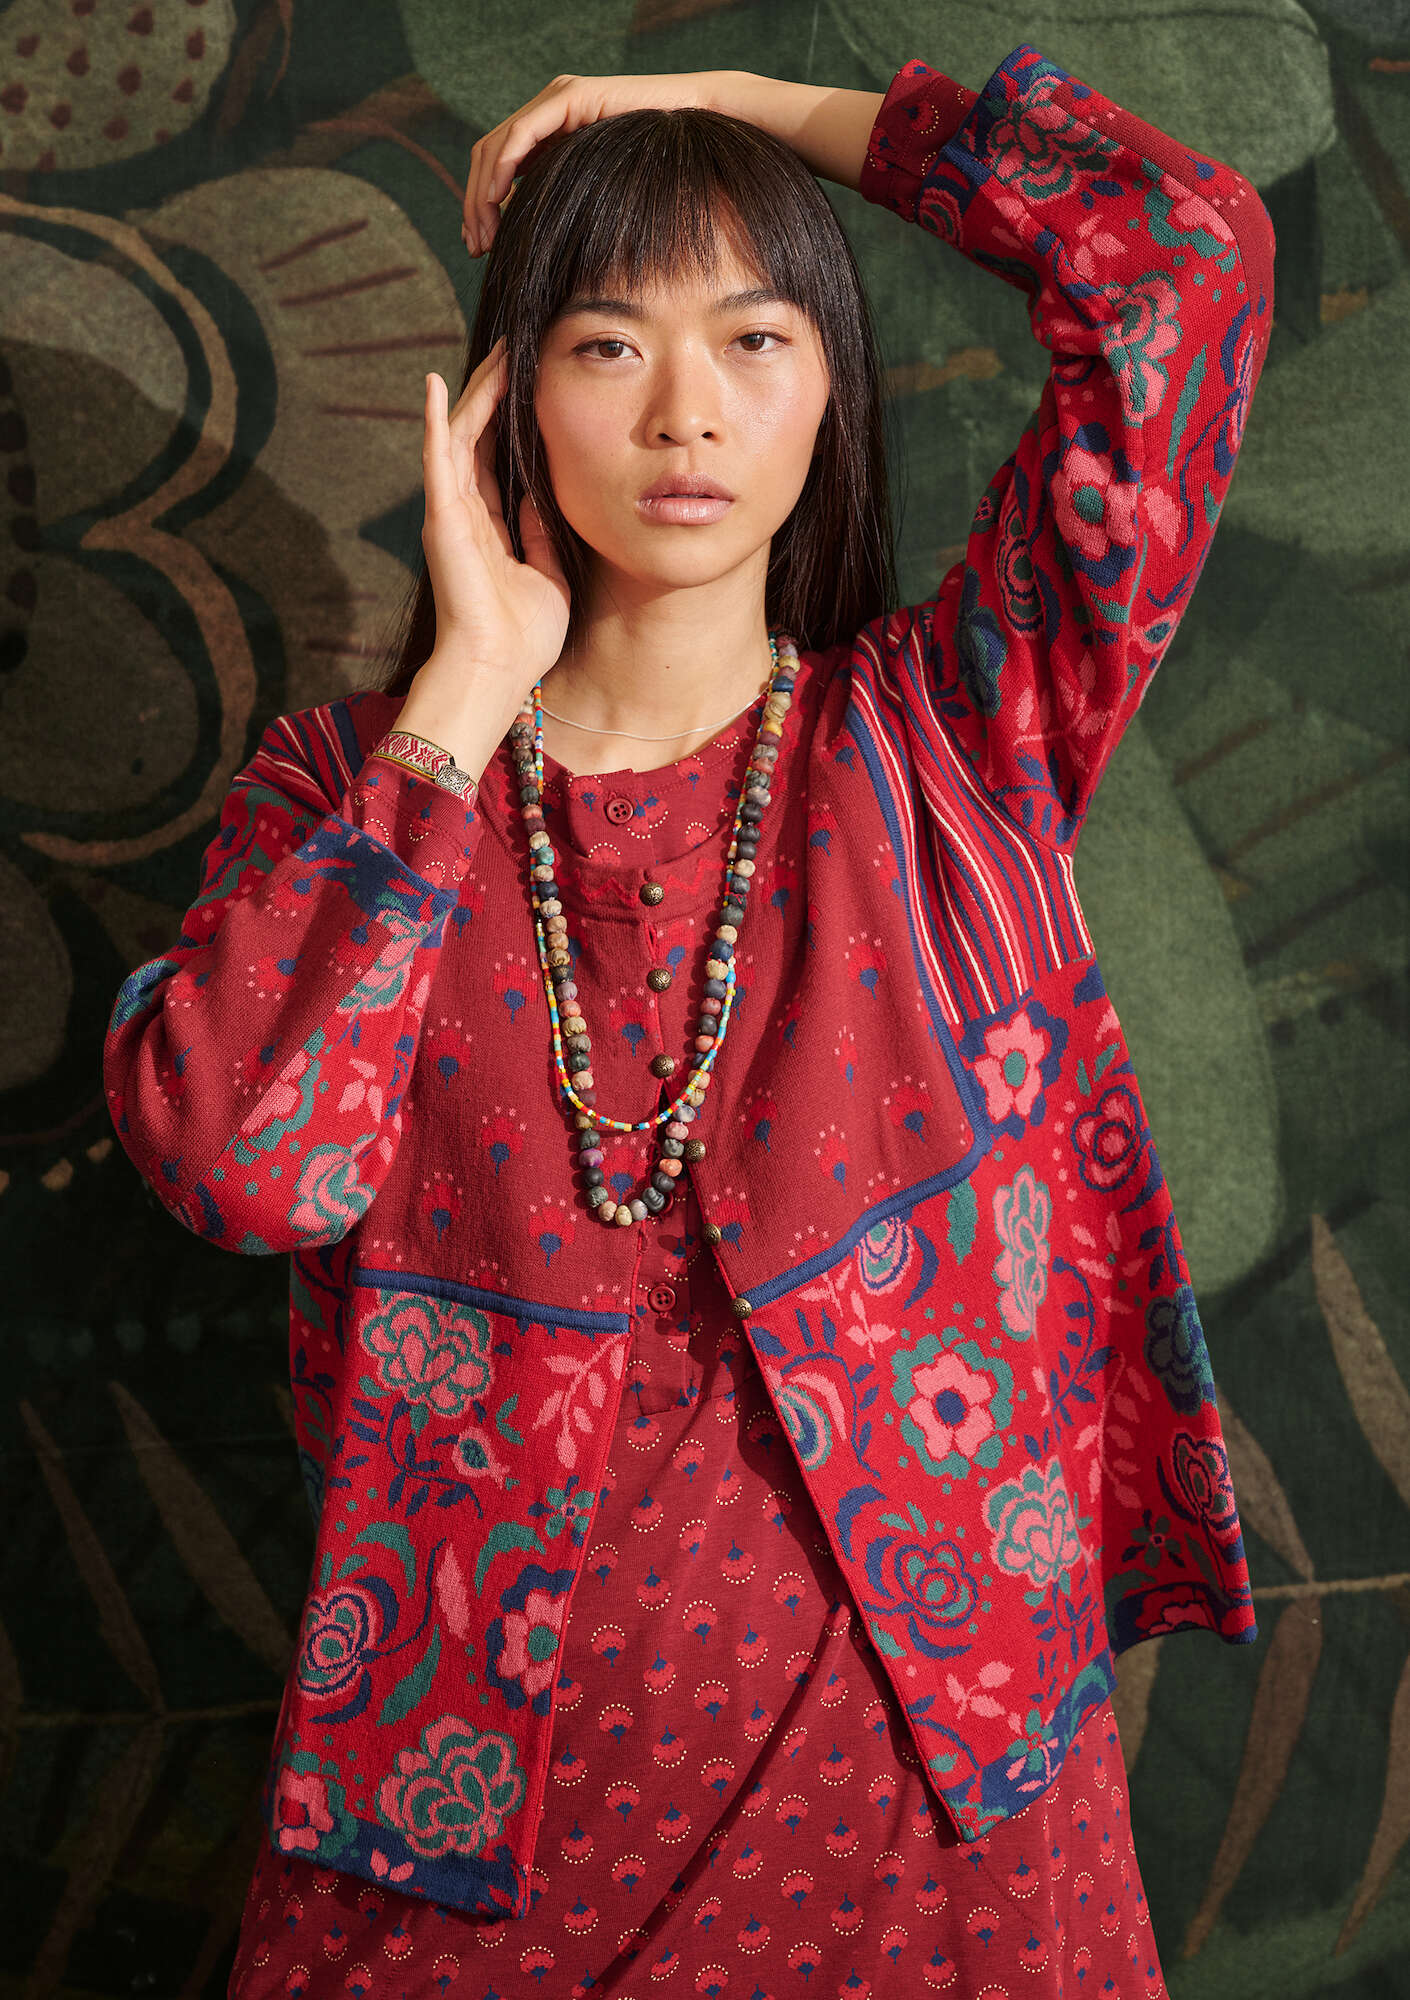 “Orsa” cardigan in organic/recycled cotton tomato